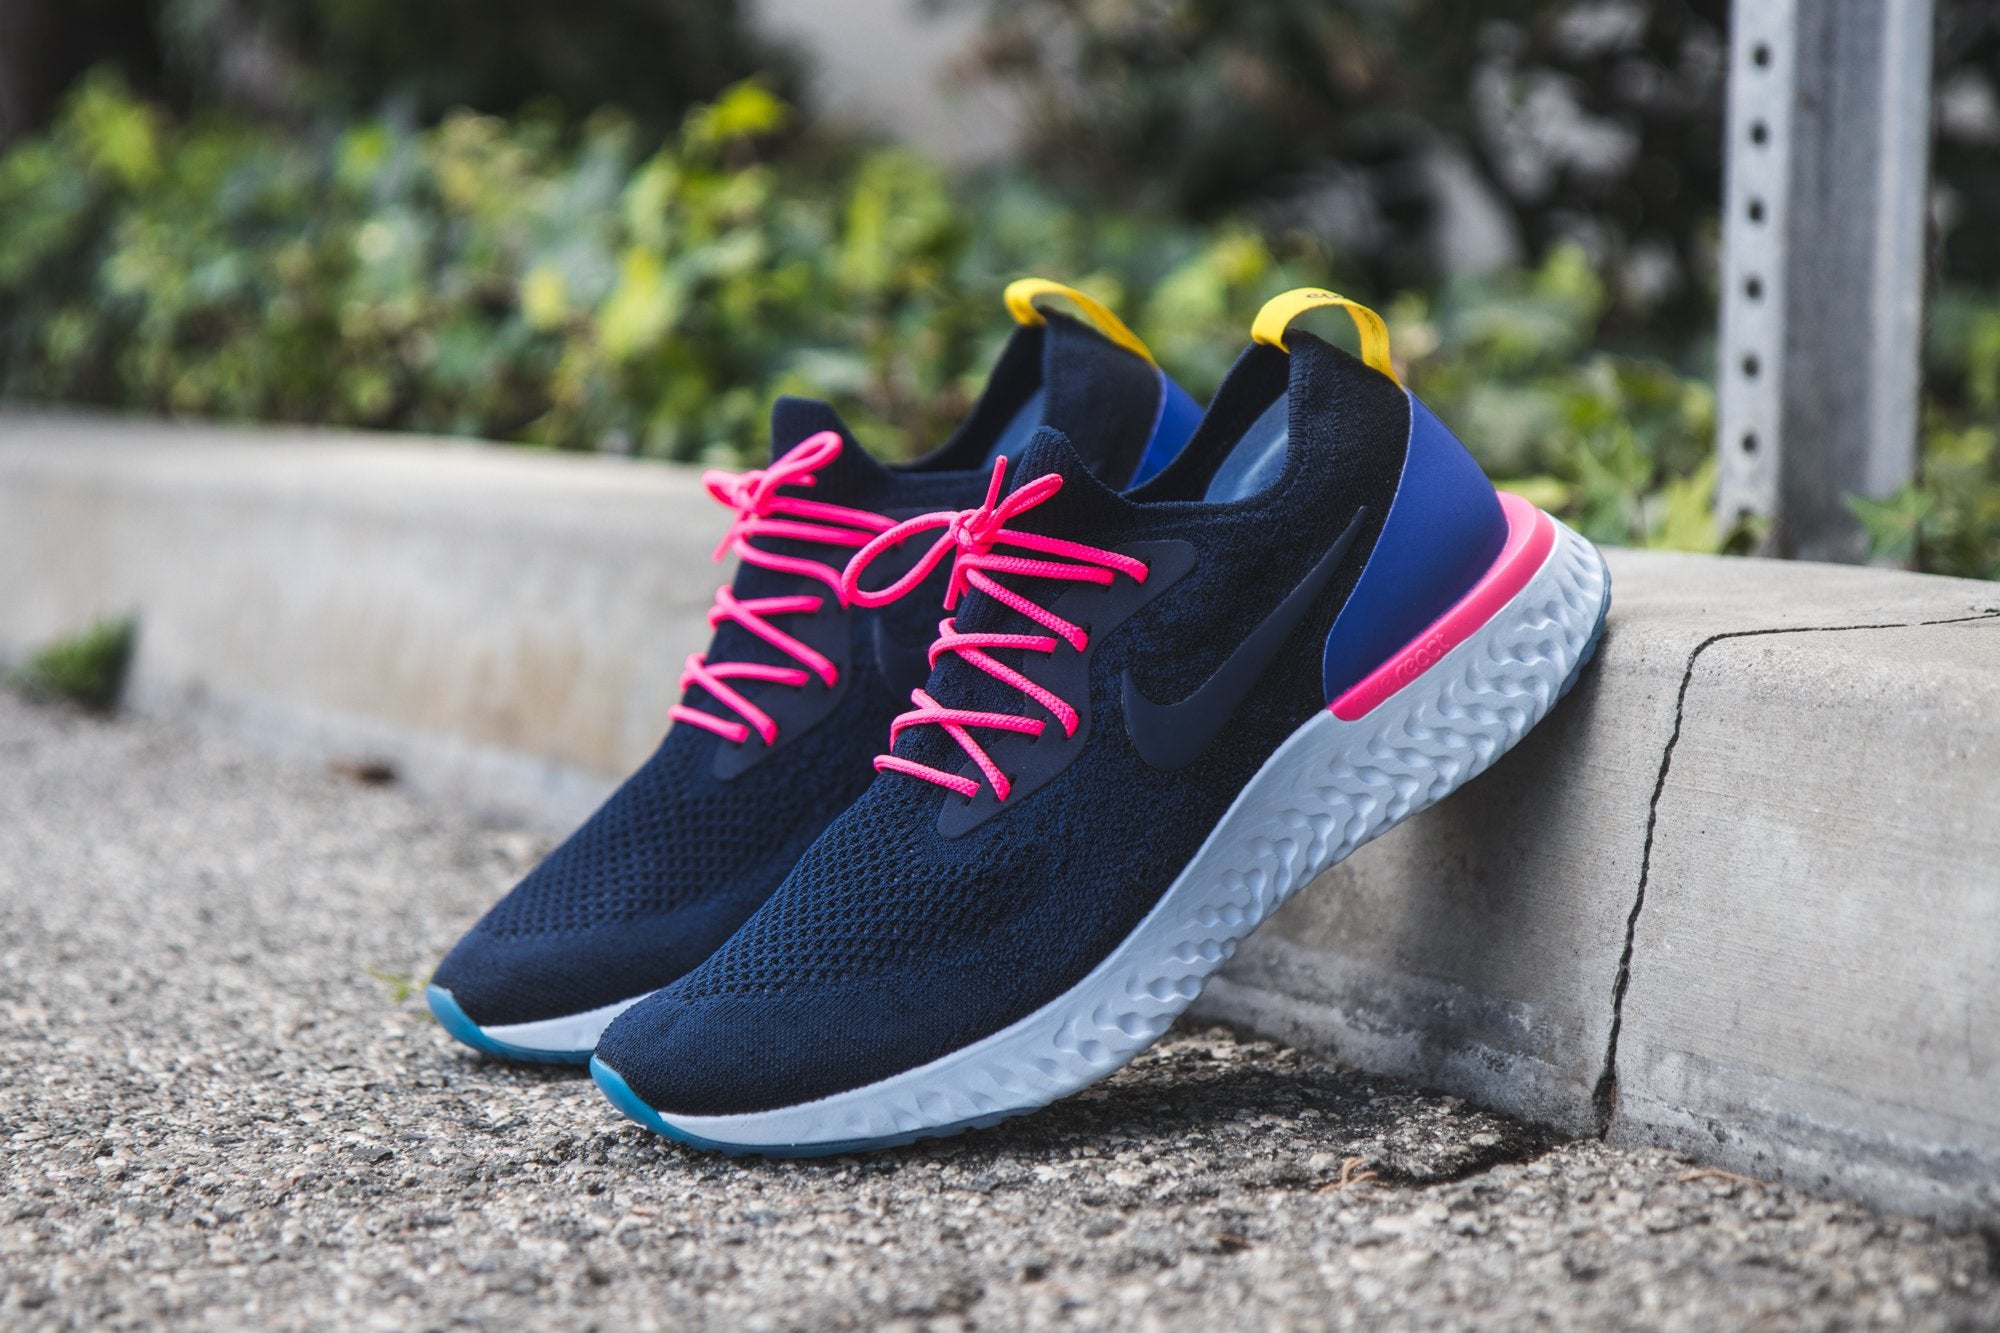 NEW EPIC REACT FLYKNIT – Lace Swapped